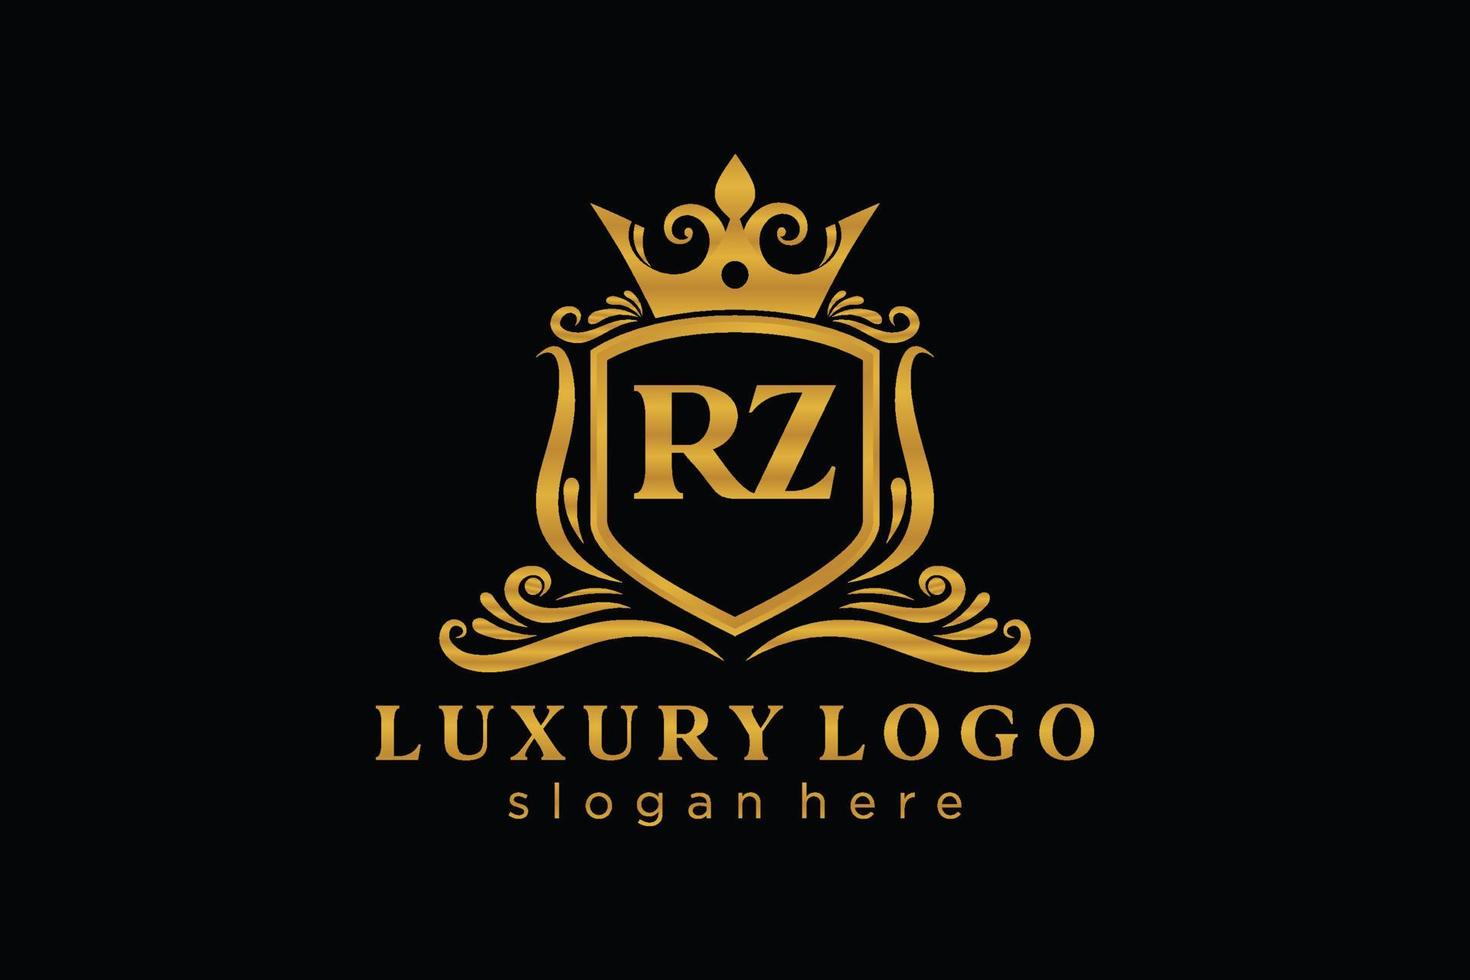 Initial RZ Letter Royal Luxury Logo template in vector art for Restaurant, Royalty, Boutique, Cafe, Hotel, Heraldic, Jewelry, Fashion and other vector illustration.